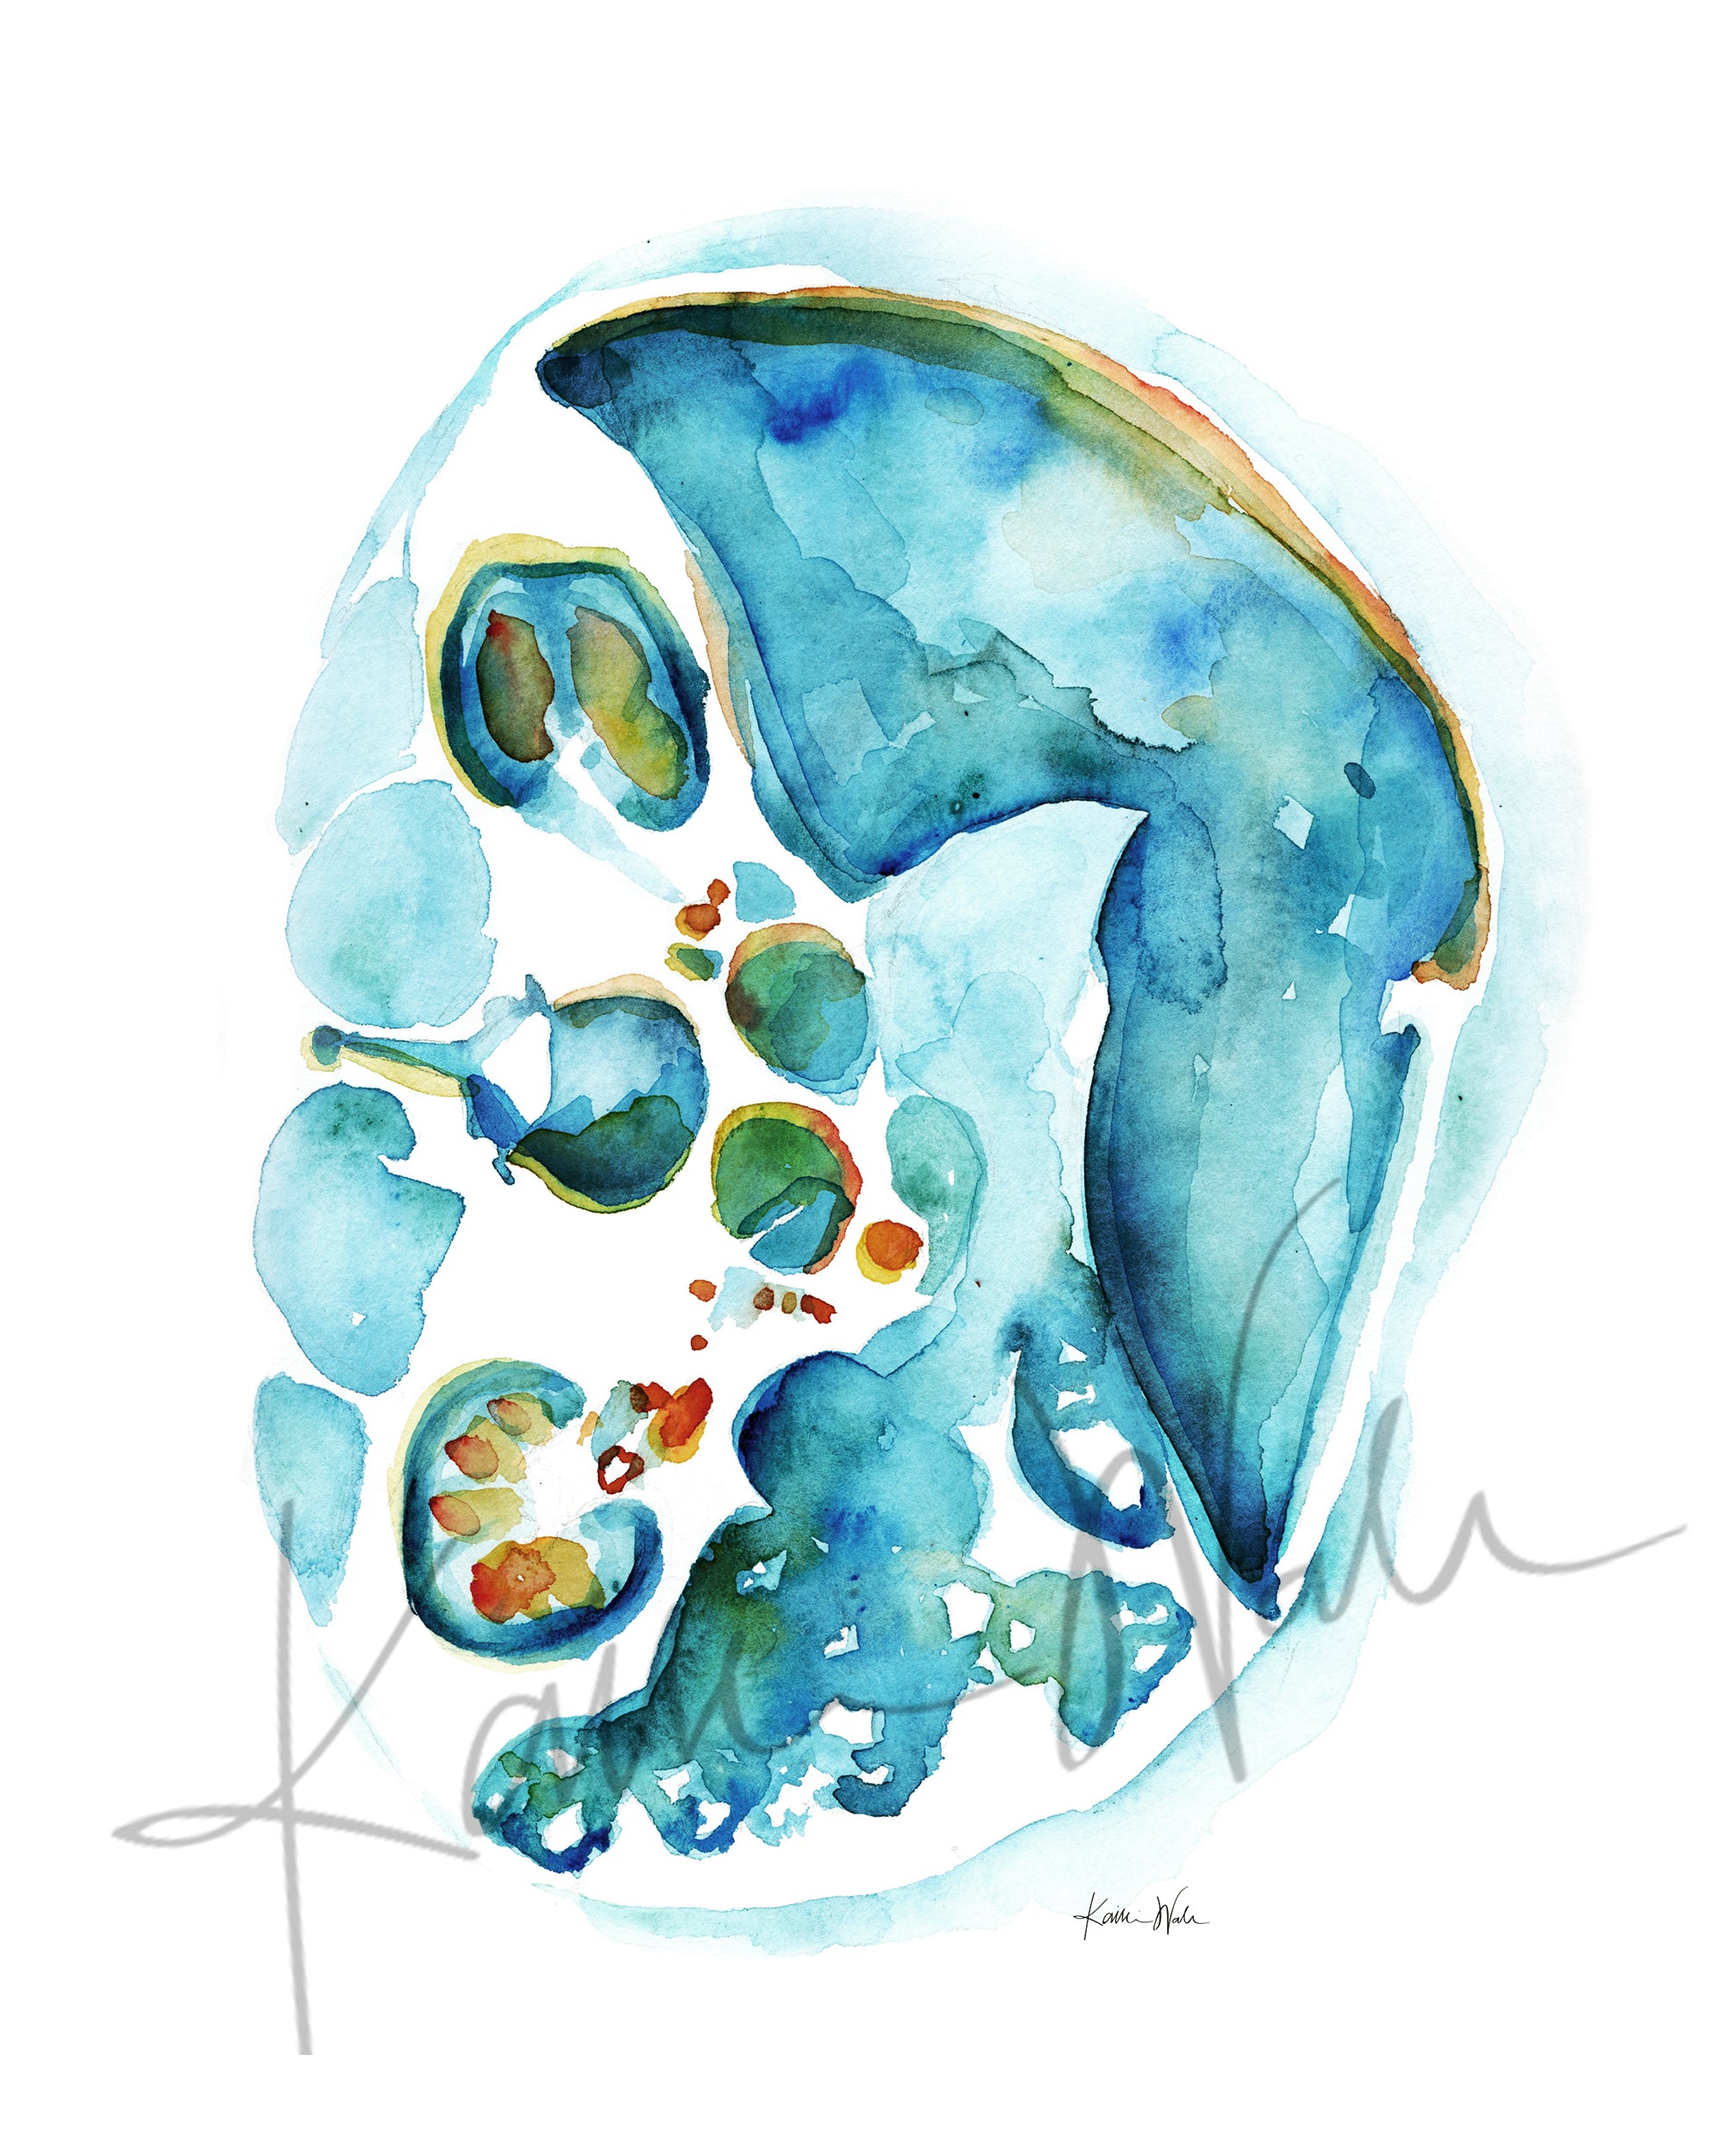 Unframed watercolor painting showing the cross section of an abdomen in blues, teals, oranges, and greens.